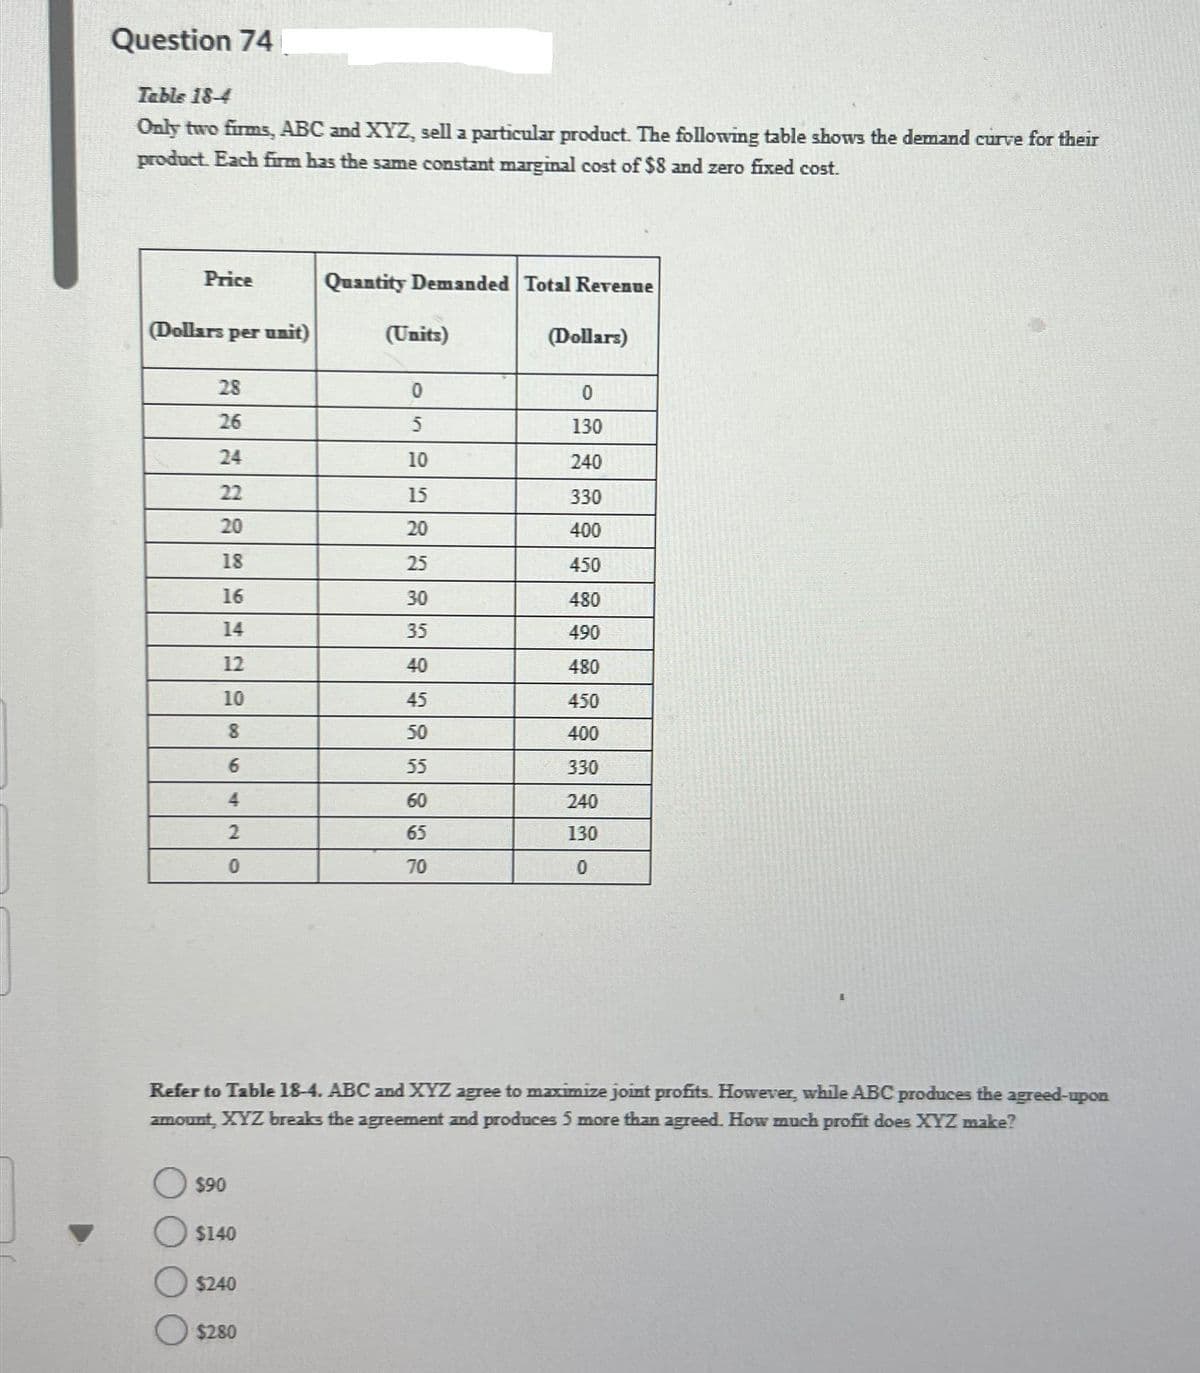 Question 74
Table 18-4
Only two firms, ABC and XYZ, sell a particular product. The following table shows the demand curve for their
product. Each firm has the same constant marginal cost of $8 and zero fixed cost.
Price
(Dollars per unit)
28
26
20
18
16
14
12
10
6
$90
2
0
$140
$240
Quantity Demanded Total Revenue
$280
(Units)
Refer to Table 18-4. ABC and XYZ agree to maximize joint profits. However, while ABC produces the agreed-upon
amount, XYZ breaks the agreement and produces 5 more than agreed. How much profit does XYZ make?
0
5
10
15
20
25
30
35
40
45
50
55
60
65
70
(Dollars)
0
130
240
330
400
450
480
490
480
450
400
330
240
130
0